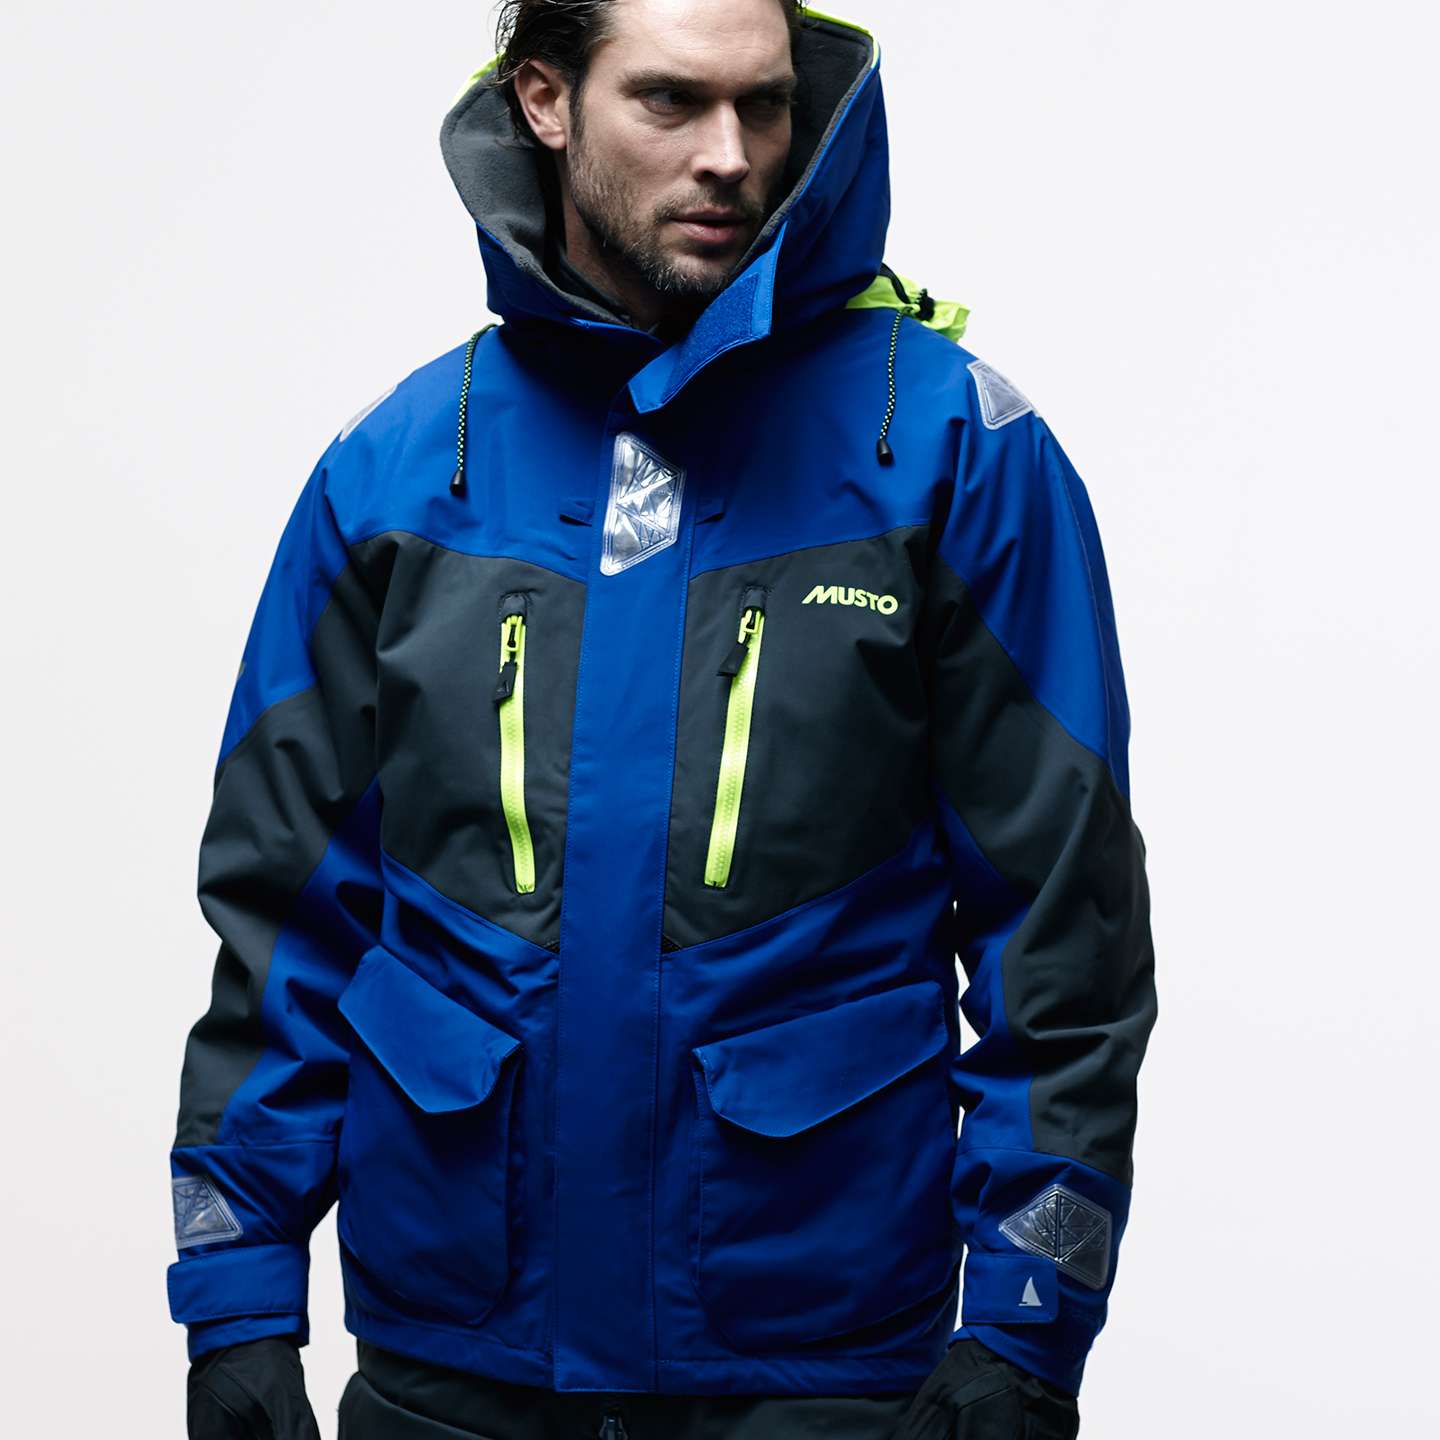 Musto BR2 Offshore Jacket 2014 | King of Watersports